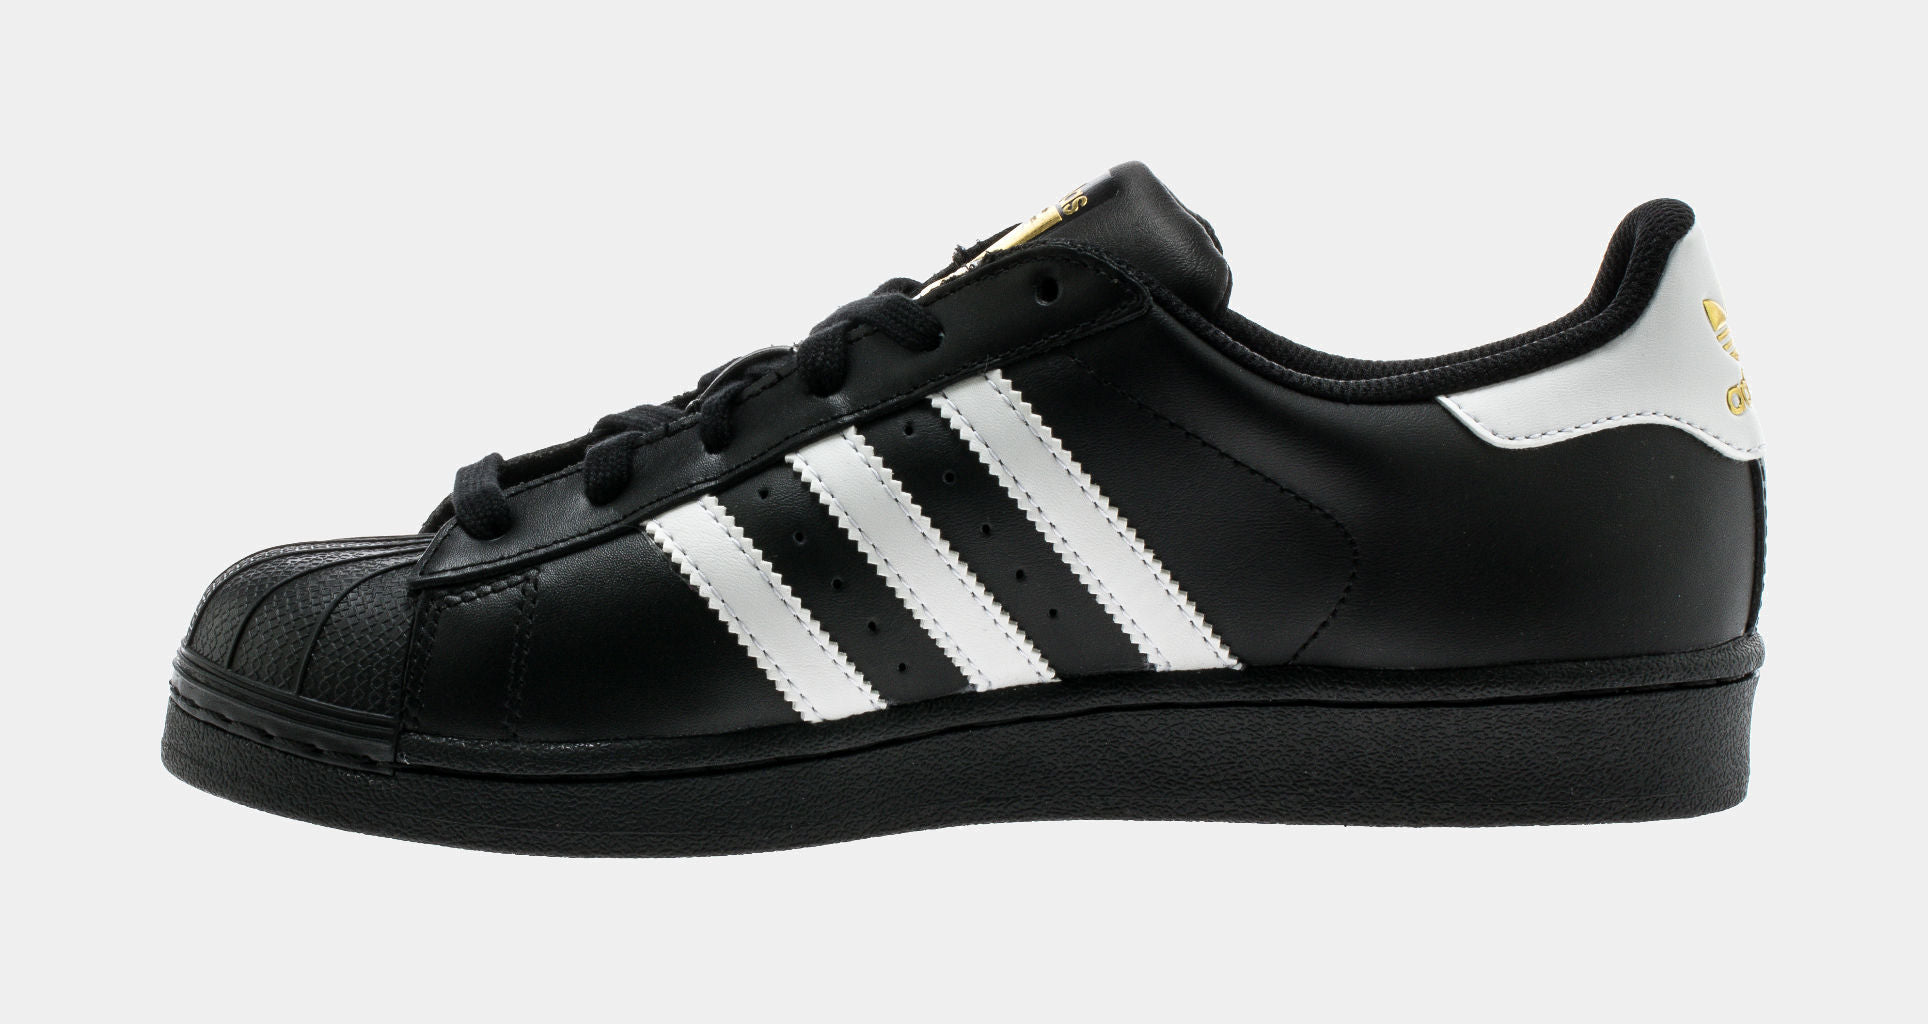 adidas, Shoes, Adidas Superstar Black And White Shell Toe Shoes Worn Once